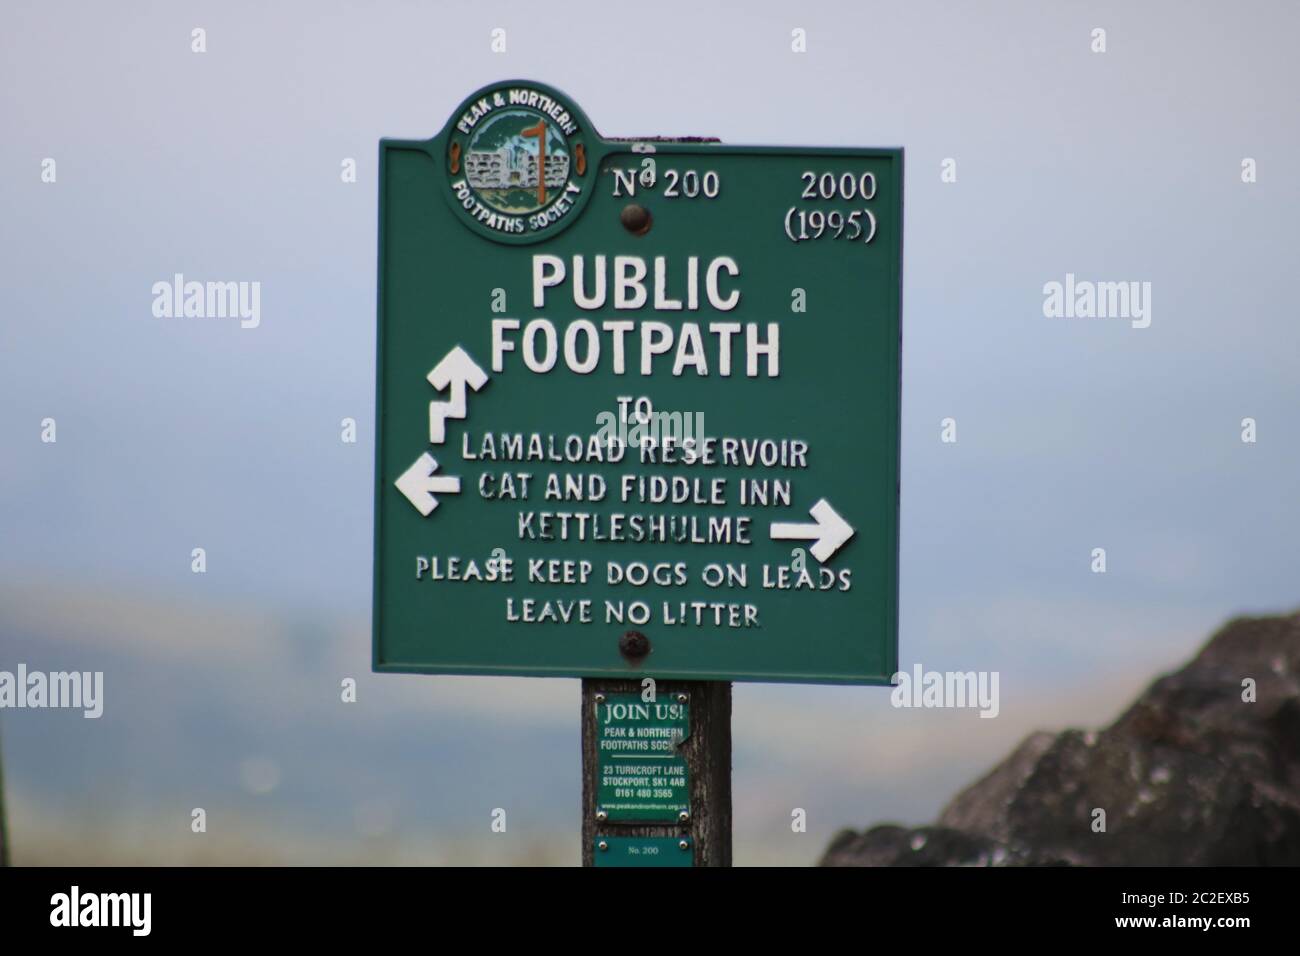 Green public footpath sign showing the way to the Cat and Fiddle Inn, Kettleshume and Lamaload reservoir Stock Photo